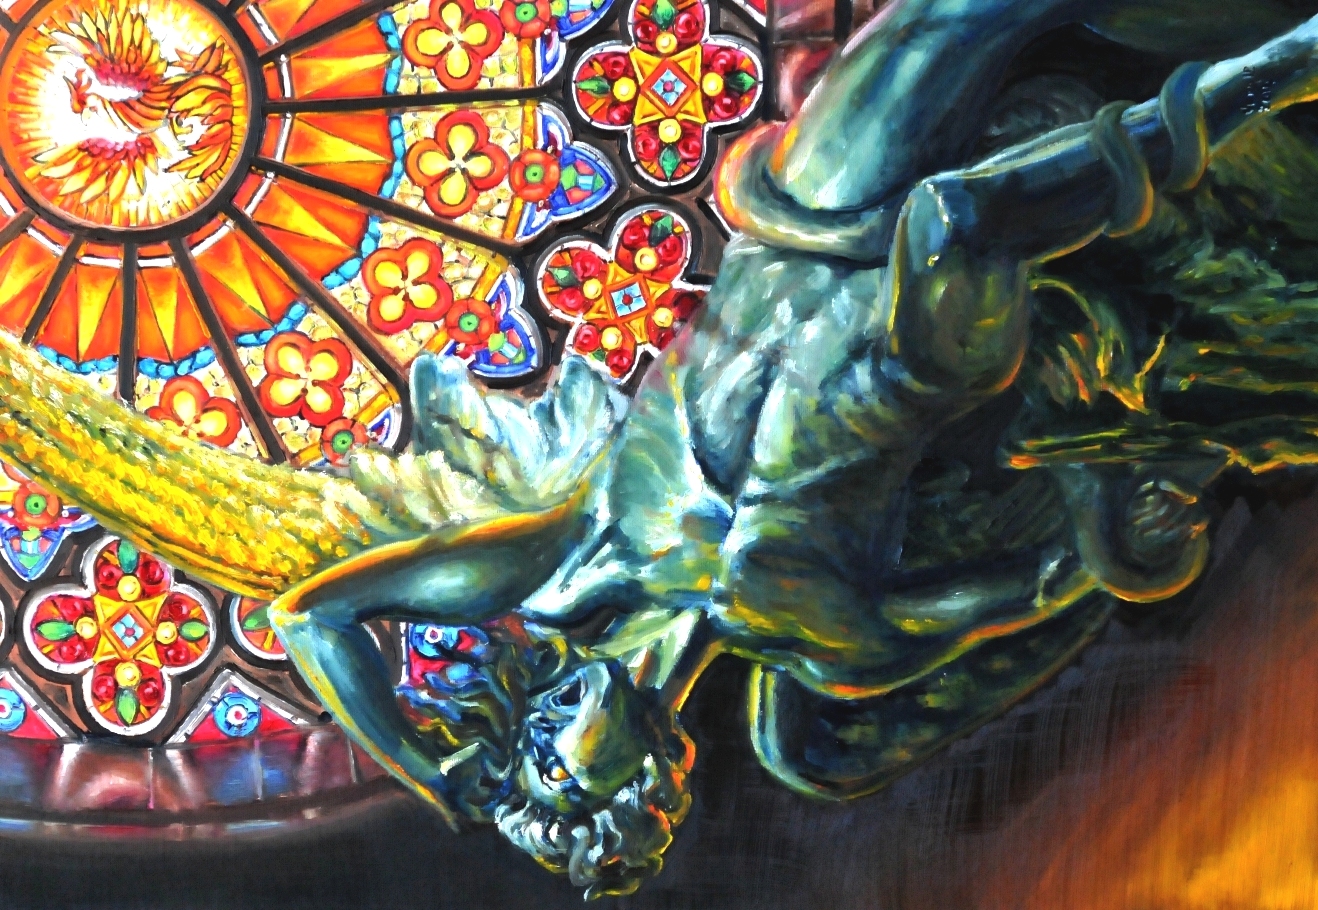 Lucifer and the Phoenix (bronze statue and stained glass) | Oil paint on linen | Year: 2014 | Dimensions: 100x70cm